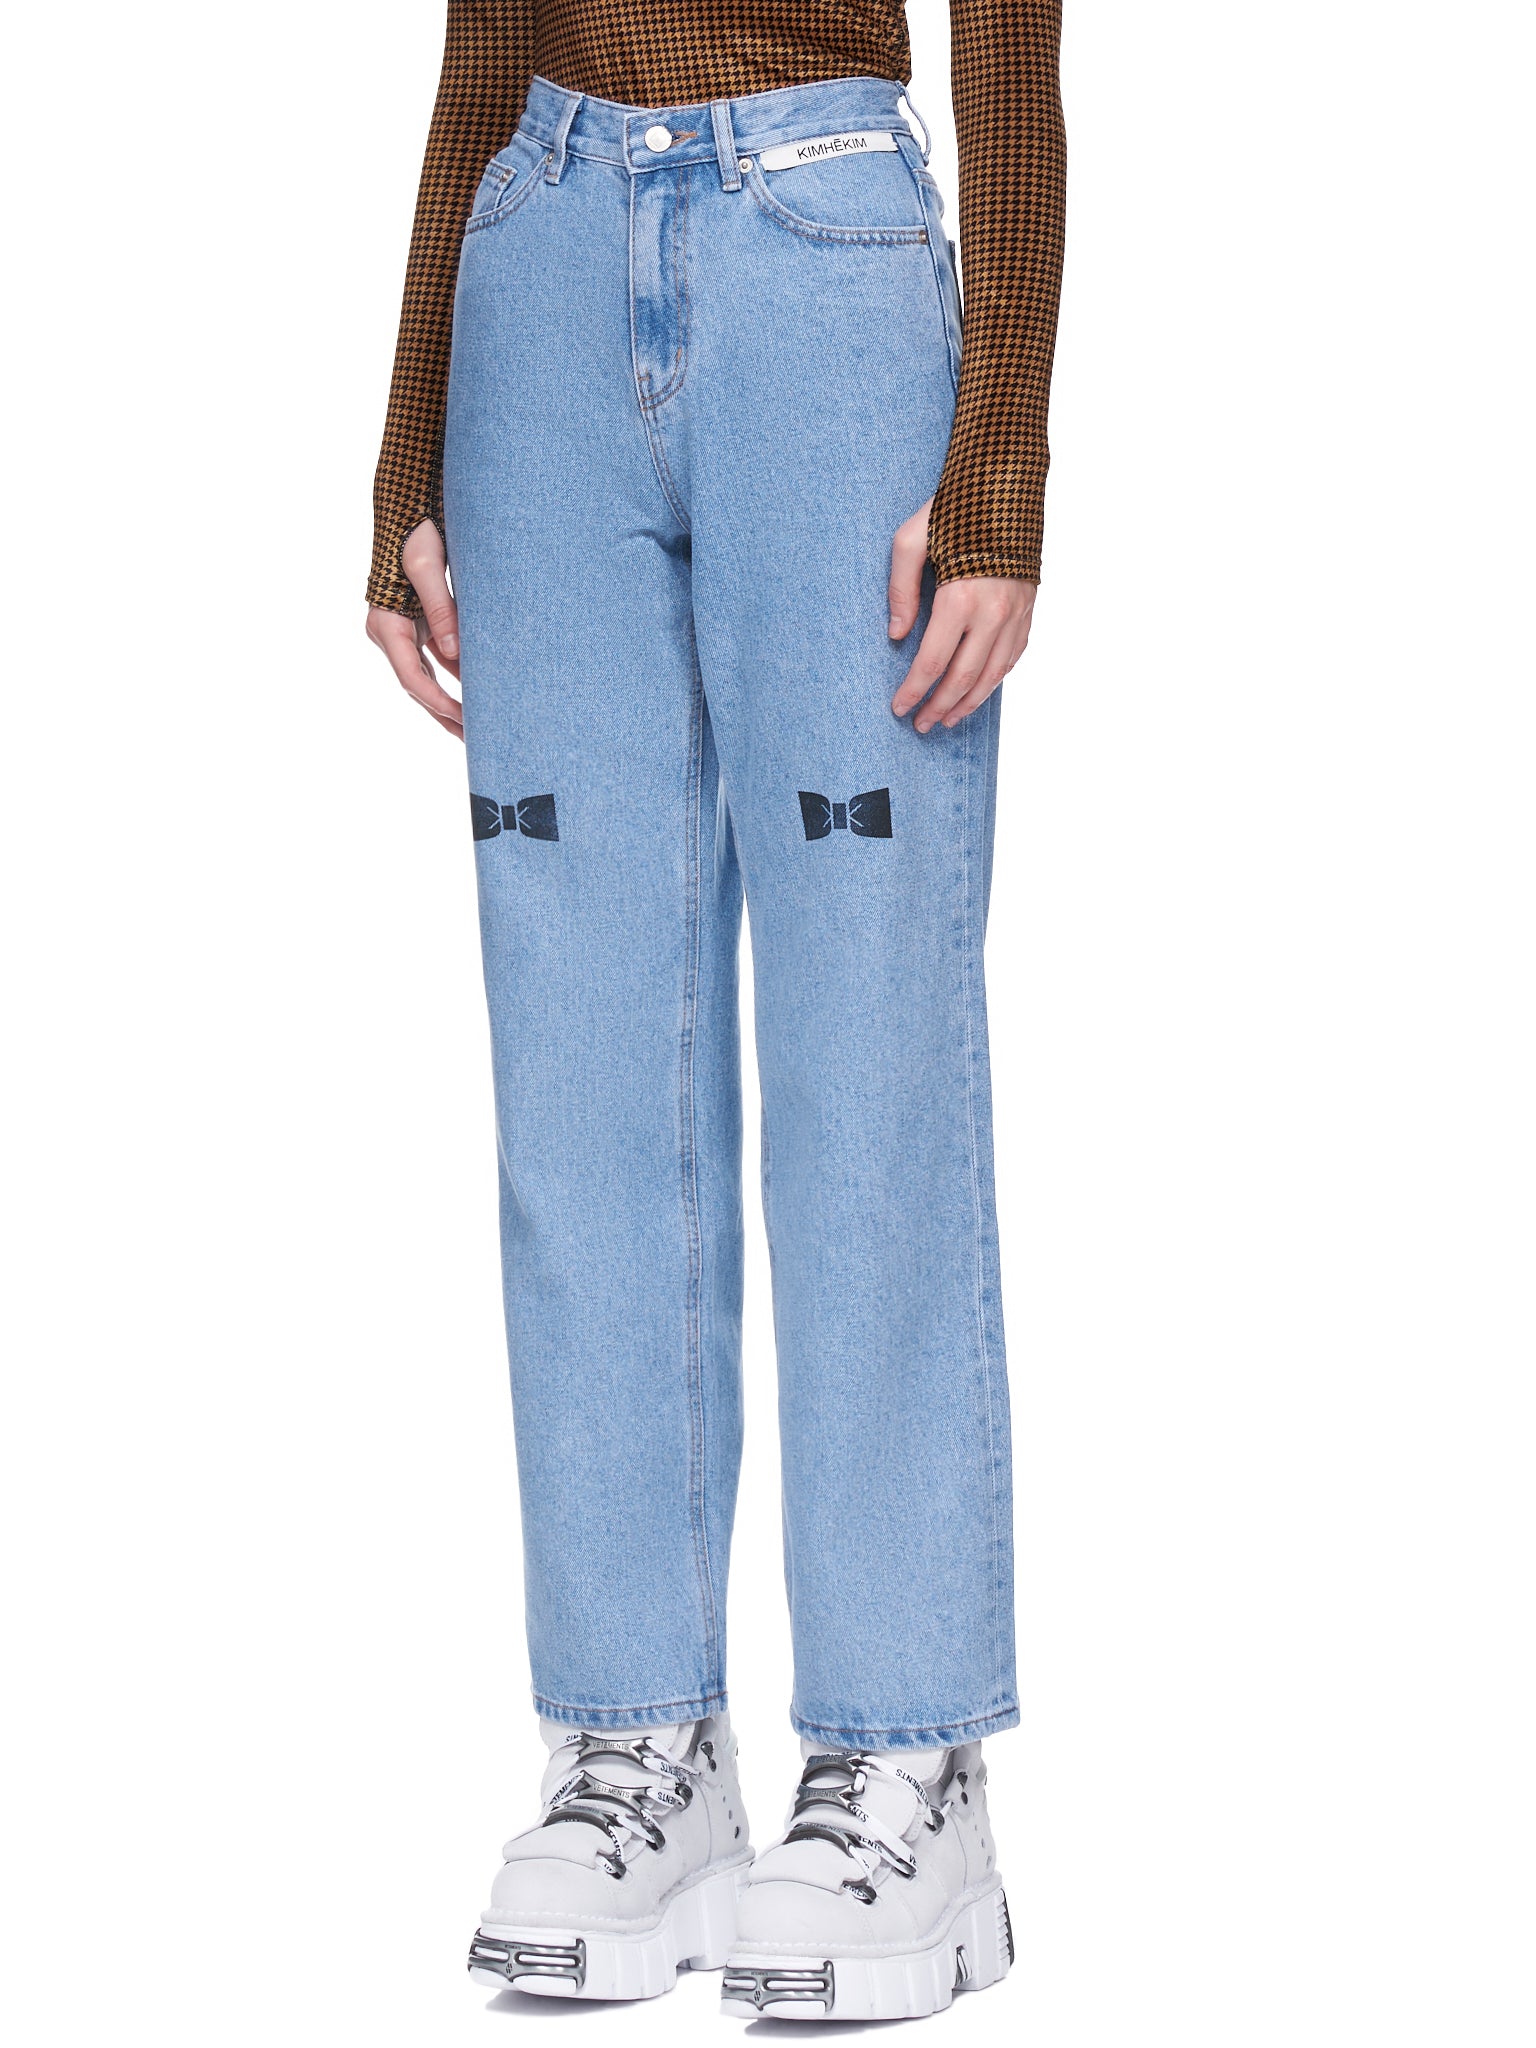 Bow Stamped Jeans (JN012-SB-SKY-BLUE)